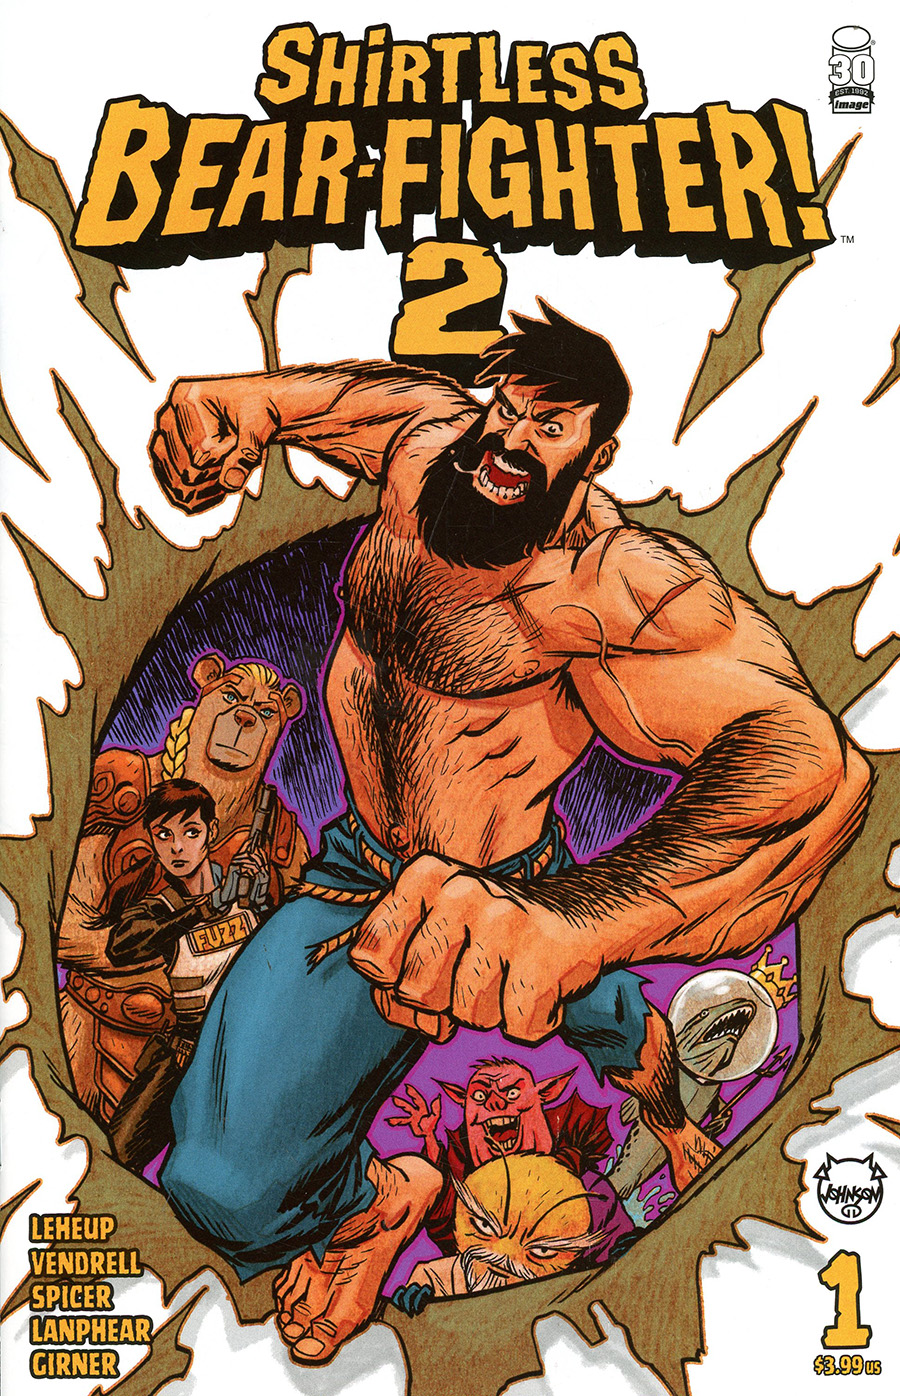 Shirtless Bear-Fighter 2 #1 Cover A Regular Dave Johnson Cover